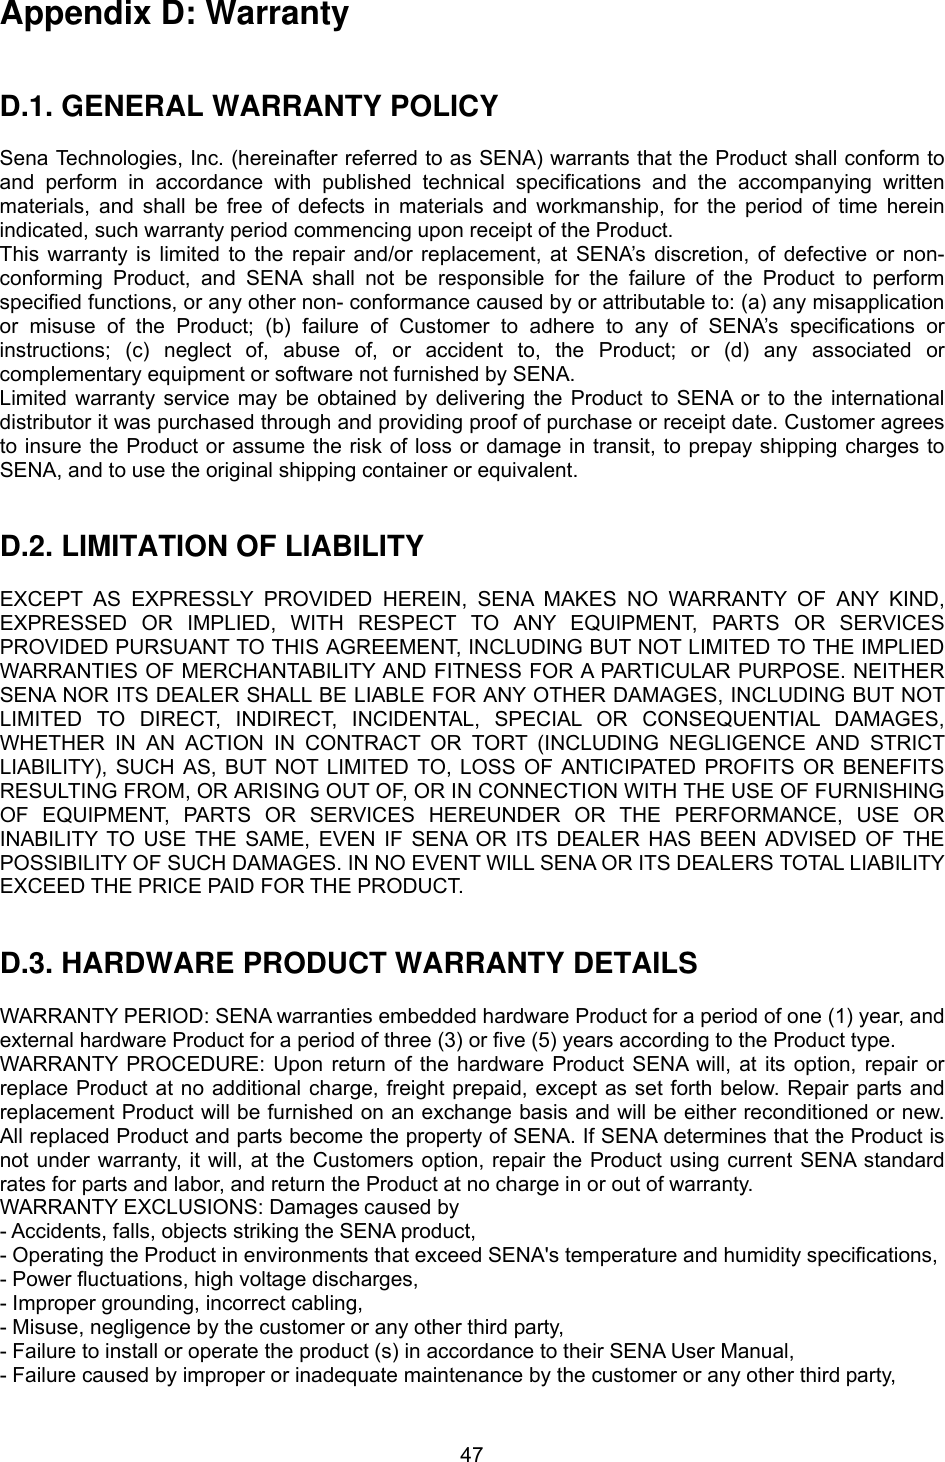  47Appendix D: Warranty   D.1. GENERAL WARRANTY POLICY  Sena Technologies, Inc. (hereinafter referred to as SENA) warrants that the Product shall conform to and perform in accordance with published technical specifications and the accompanying written materials, and shall be free of defects in materials and workmanship, for the period of time herein indicated, such warranty period commencing upon receipt of the Product.   This warranty is limited to the repair and/or replacement, at SENA’s discretion, of defective or non-conforming Product, and SENA shall not be responsible for the failure of the Product to perform specified functions, or any other non- conformance caused by or attributable to: (a) any misapplication or misuse of the Product; (b) failure of Customer to adhere to any of SENA’s specifications or instructions; (c) neglect of, abuse of, or accident to, the Product; or (d) any associated or complementary equipment or software not furnished by SENA.   Limited warranty service may be obtained by delivering the Product to SENA or to the international distributor it was purchased through and providing proof of purchase or receipt date. Customer agrees to insure the Product or assume the risk of loss or damage in transit, to prepay shipping charges to SENA, and to use the original shipping container or equivalent.     D.2. LIMITATION OF LIABILITY  EXCEPT AS EXPRESSLY PROVIDED HEREIN, SENA MAKES NO WARRANTY OF ANY KIND, EXPRESSED OR IMPLIED, WITH RESPECT TO ANY EQUIPMENT, PARTS OR SERVICES PROVIDED PURSUANT TO THIS AGREEMENT, INCLUDING BUT NOT LIMITED TO THE IMPLIED WARRANTIES OF MERCHANTABILITY AND FITNESS FOR A PARTICULAR PURPOSE. NEITHER SENA NOR ITS DEALER SHALL BE LIABLE FOR ANY OTHER DAMAGES, INCLUDING BUT NOT LIMITED TO DIRECT, INDIRECT, INCIDENTAL, SPECIAL OR CONSEQUENTIAL DAMAGES, WHETHER IN AN ACTION IN CONTRACT OR TORT (INCLUDING NEGLIGENCE AND STRICT LIABILITY), SUCH AS, BUT NOT LIMITED TO, LOSS OF ANTICIPATED PROFITS OR BENEFITS RESULTING FROM, OR ARISING OUT OF, OR IN CONNECTION WITH THE USE OF FURNISHING OF EQUIPMENT, PARTS OR SERVICES HEREUNDER OR THE PERFORMANCE, USE OR INABILITY TO USE THE SAME, EVEN IF SENA OR ITS DEALER HAS BEEN ADVISED OF THE POSSIBILITY OF SUCH DAMAGES. IN NO EVENT WILL SENA OR ITS DEALERS TOTAL LIABILITY EXCEED THE PRICE PAID FOR THE PRODUCT.   D.3. HARDWARE PRODUCT WARRANTY DETAILS  WARRANTY PERIOD: SENA warranties embedded hardware Product for a period of one (1) year, and external hardware Product for a period of three (3) or five (5) years according to the Product type. WARRANTY PROCEDURE: Upon return of the hardware Product SENA will, at its option, repair or replace Product at no additional charge, freight prepaid, except as set forth below. Repair parts and replacement Product will be furnished on an exchange basis and will be either reconditioned or new. All replaced Product and parts become the property of SENA. If SENA determines that the Product is not under warranty, it will, at the Customers option, repair the Product using current SENA standard rates for parts and labor, and return the Product at no charge in or out of warranty.   WARRANTY EXCLUSIONS: Damages caused by - Accidents, falls, objects striking the SENA product, - Operating the Product in environments that exceed SENA&apos;s temperature and humidity specifications, - Power fluctuations, high voltage discharges, - Improper grounding, incorrect cabling, - Misuse, negligence by the customer or any other third party, - Failure to install or operate the product (s) in accordance to their SENA User Manual, - Failure caused by improper or inadequate maintenance by the customer or any other third party, 